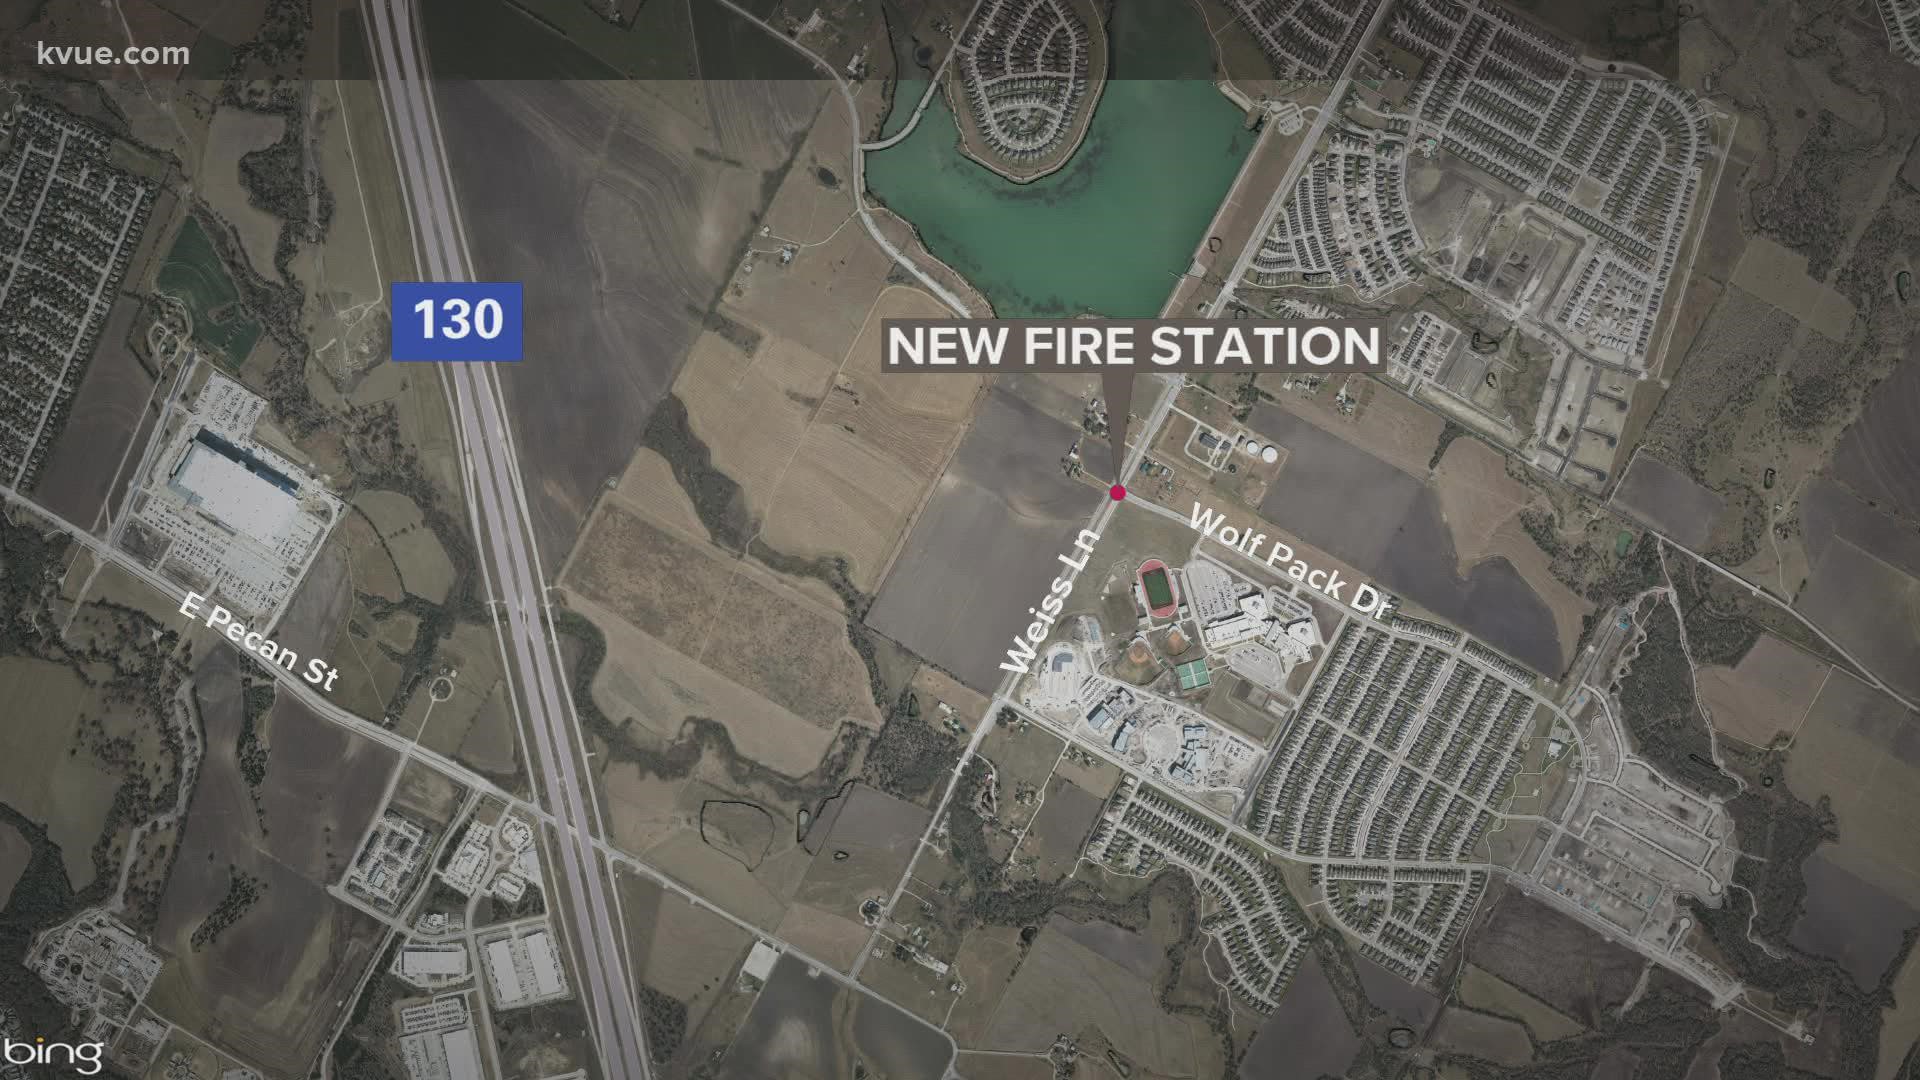 Pflugerville will soon get another fire station. Construction is set to begin by the end of the year for the station on Weiss Lane near Lake Pflugerville.